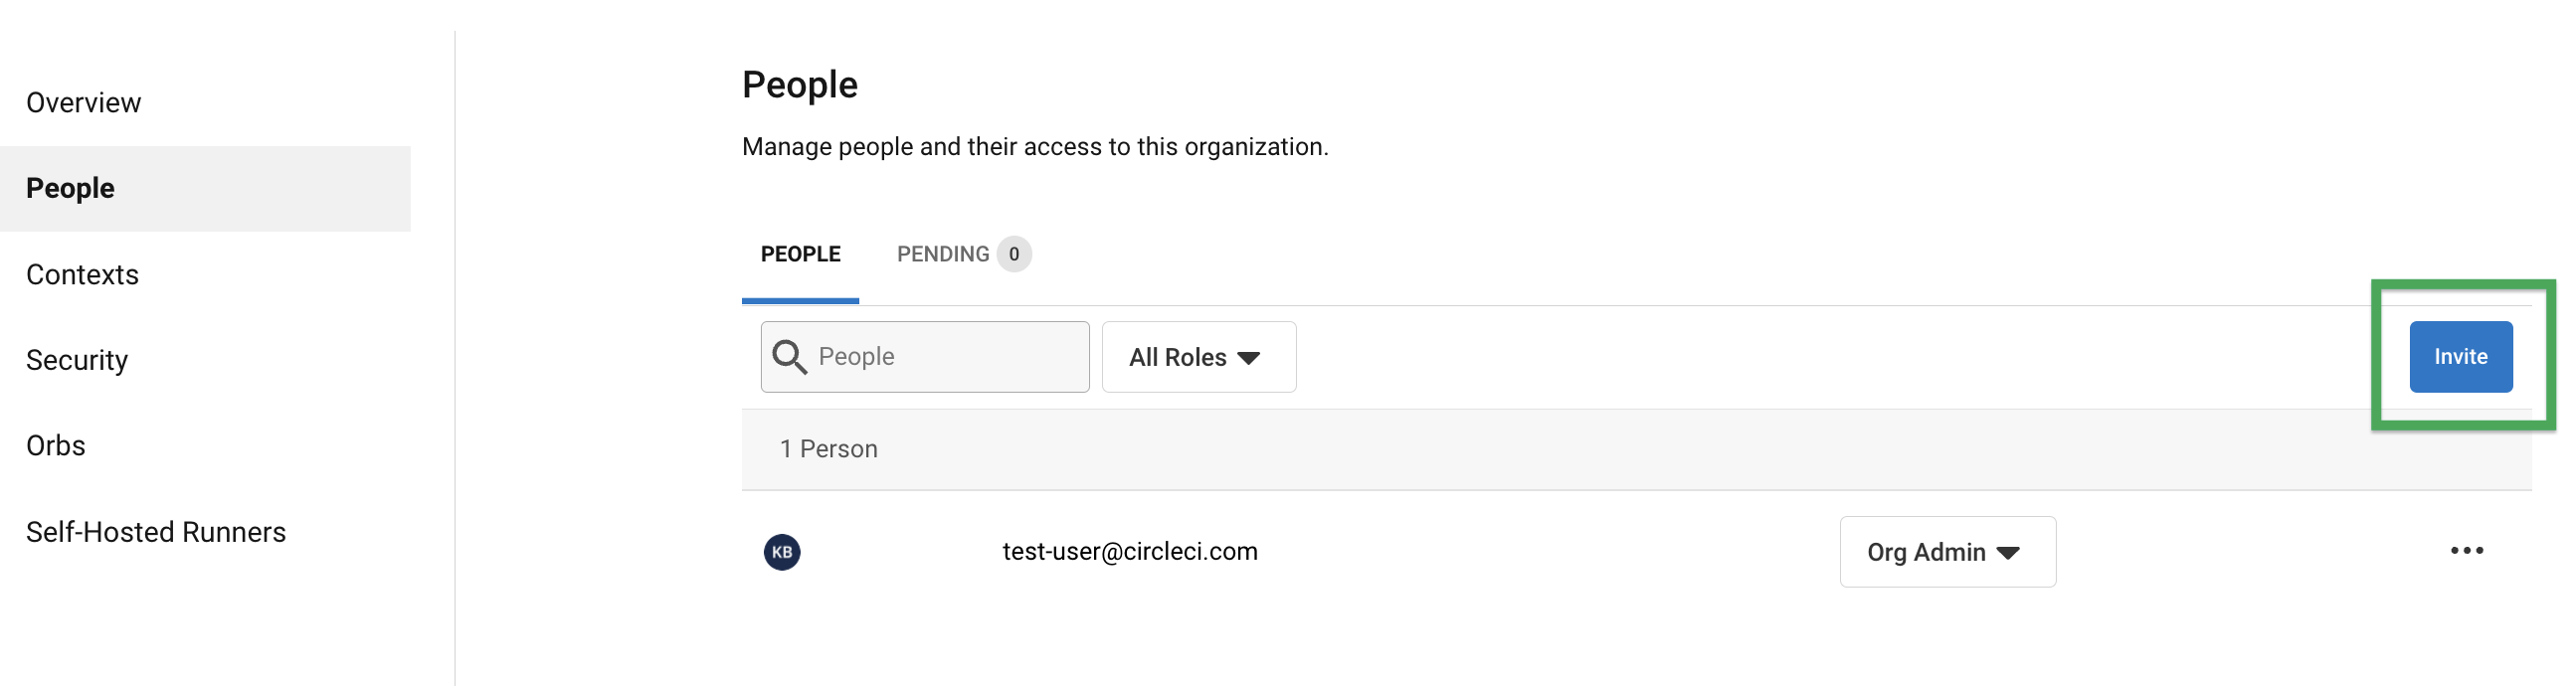 People section under Organization Settings